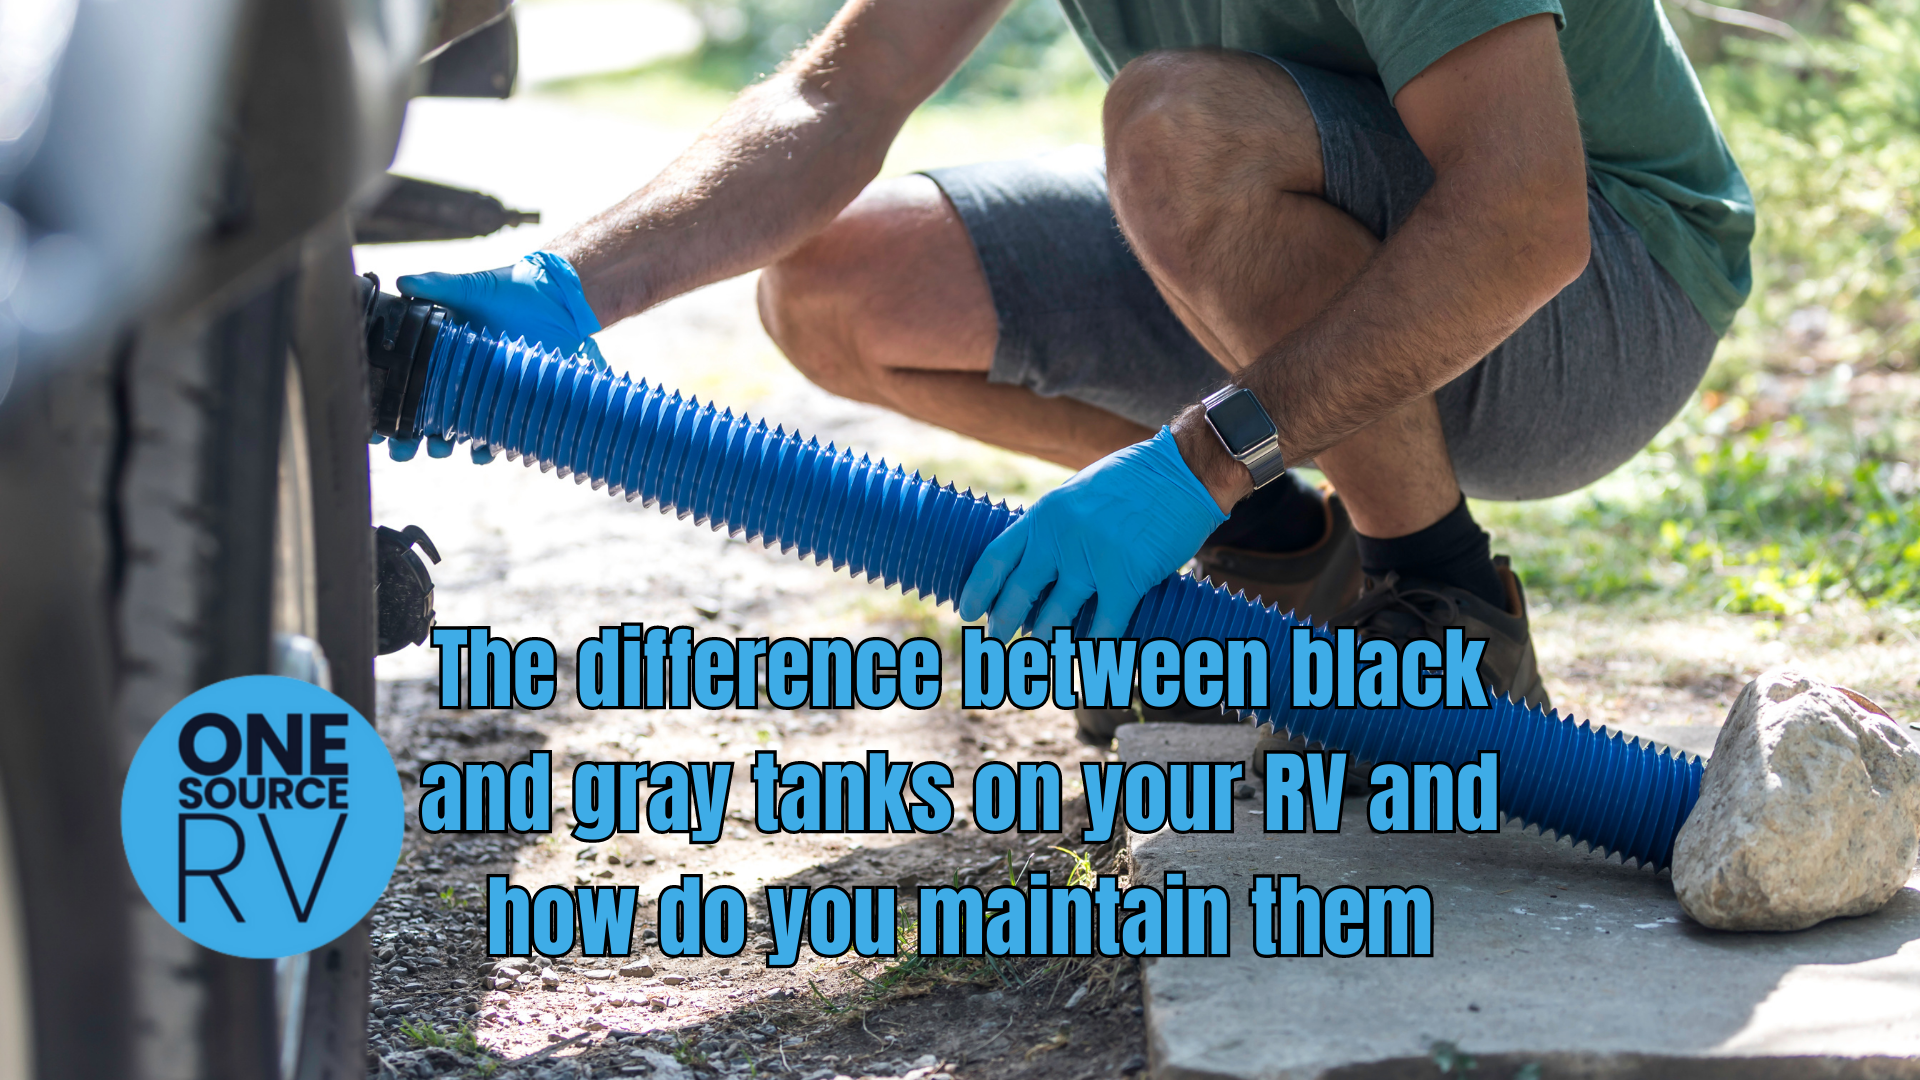 What is the difference between black and gray tanks on your rv and how do you maintain them?